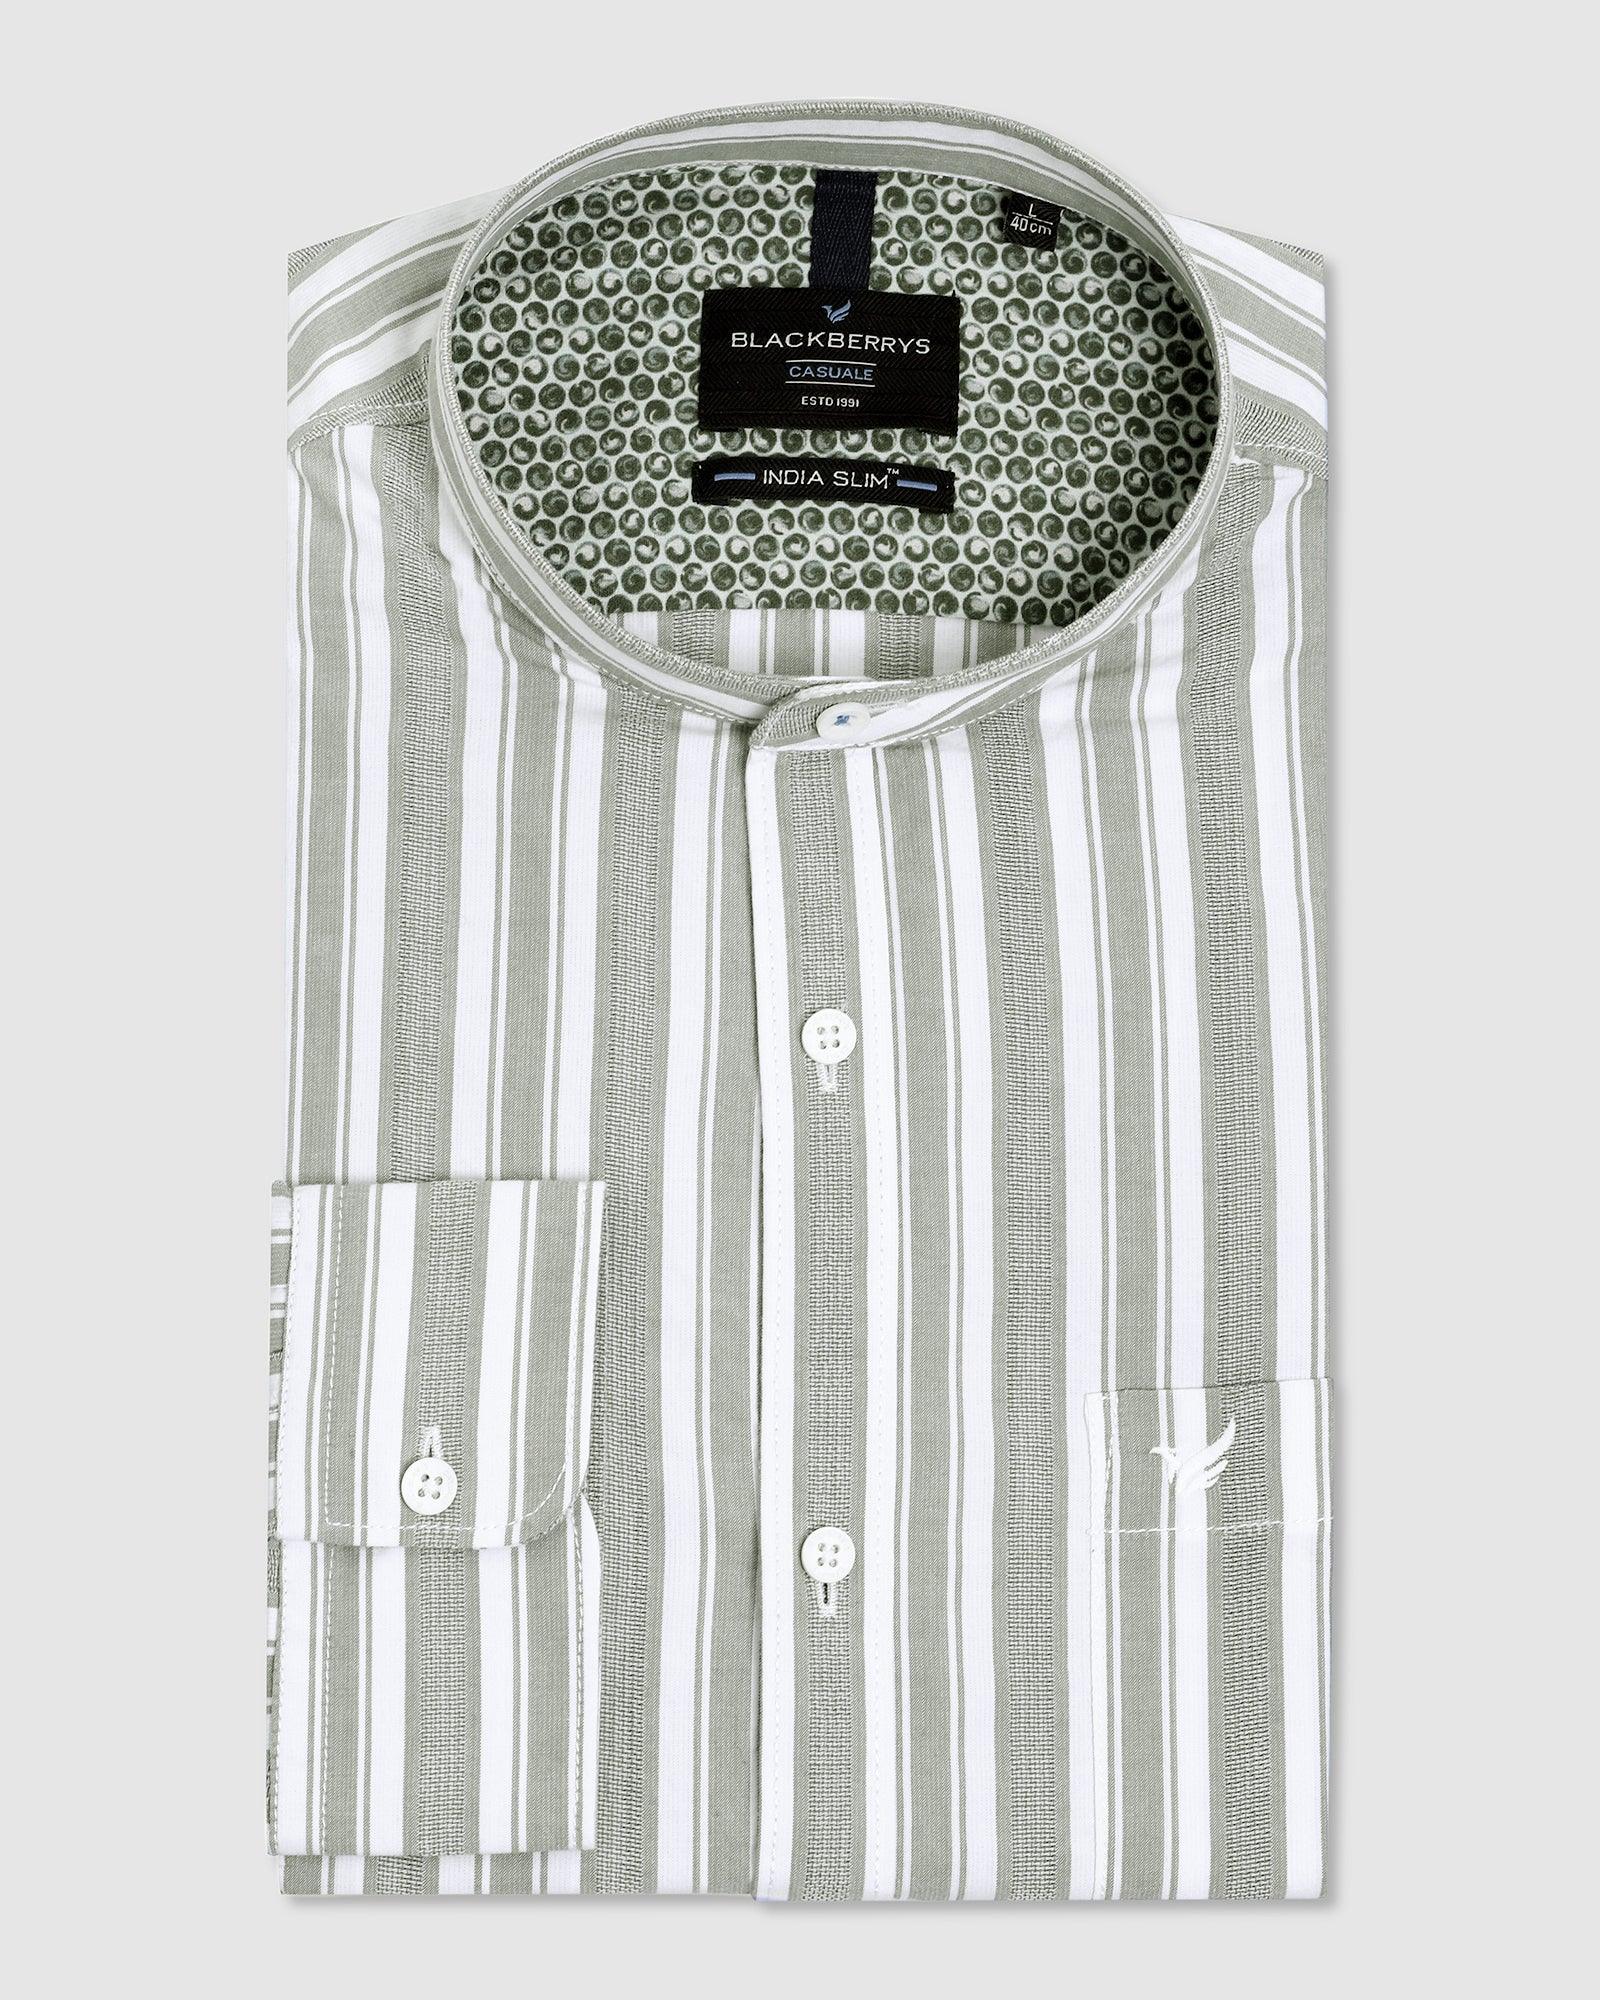 Casual Olive Striped Shirt - Solana